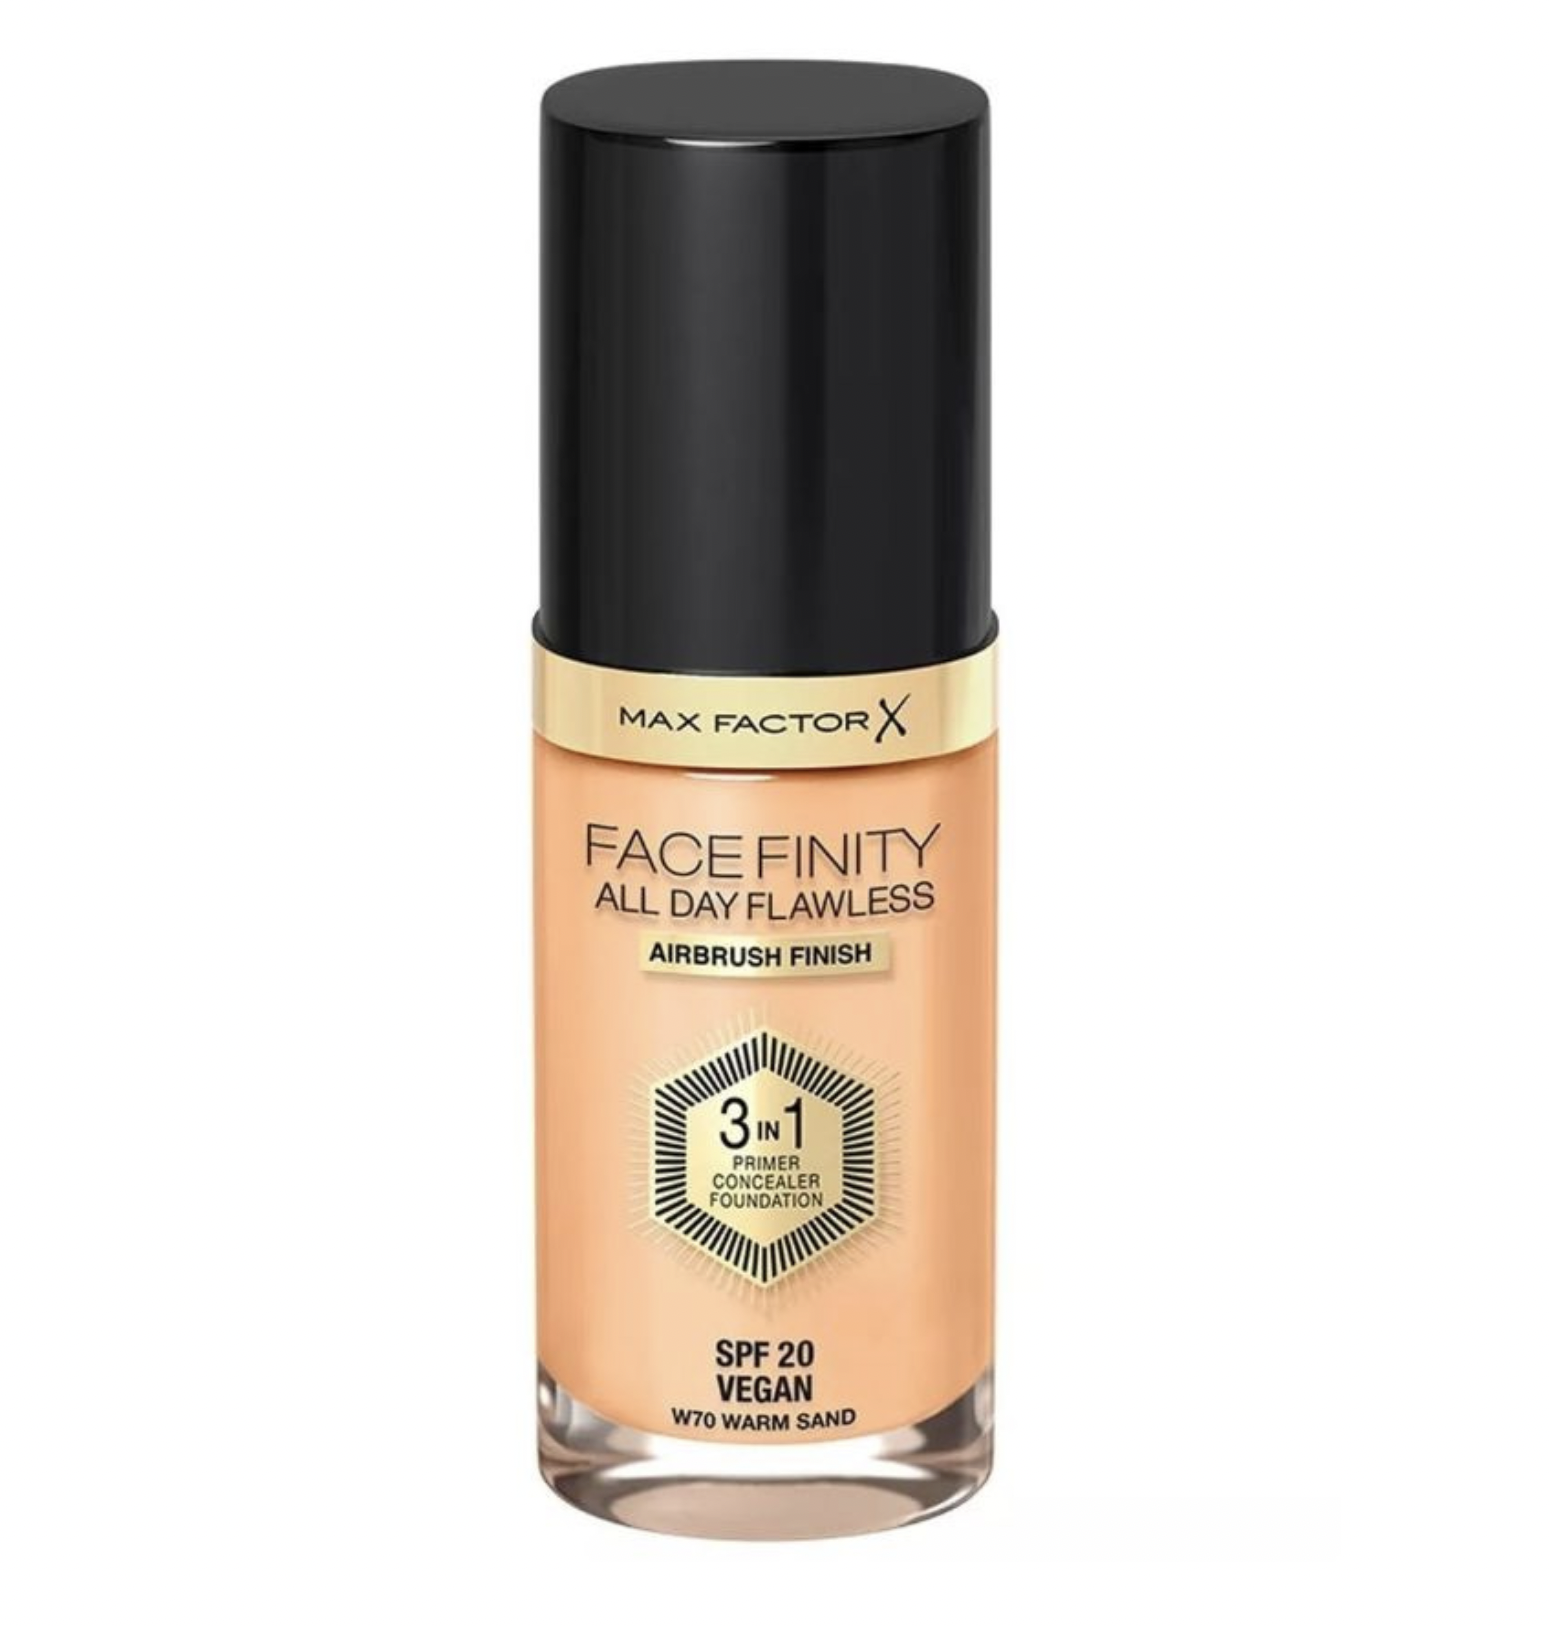    / Max Factor   Face Finity All Day Flawless 31  W70 Warm sand 30 